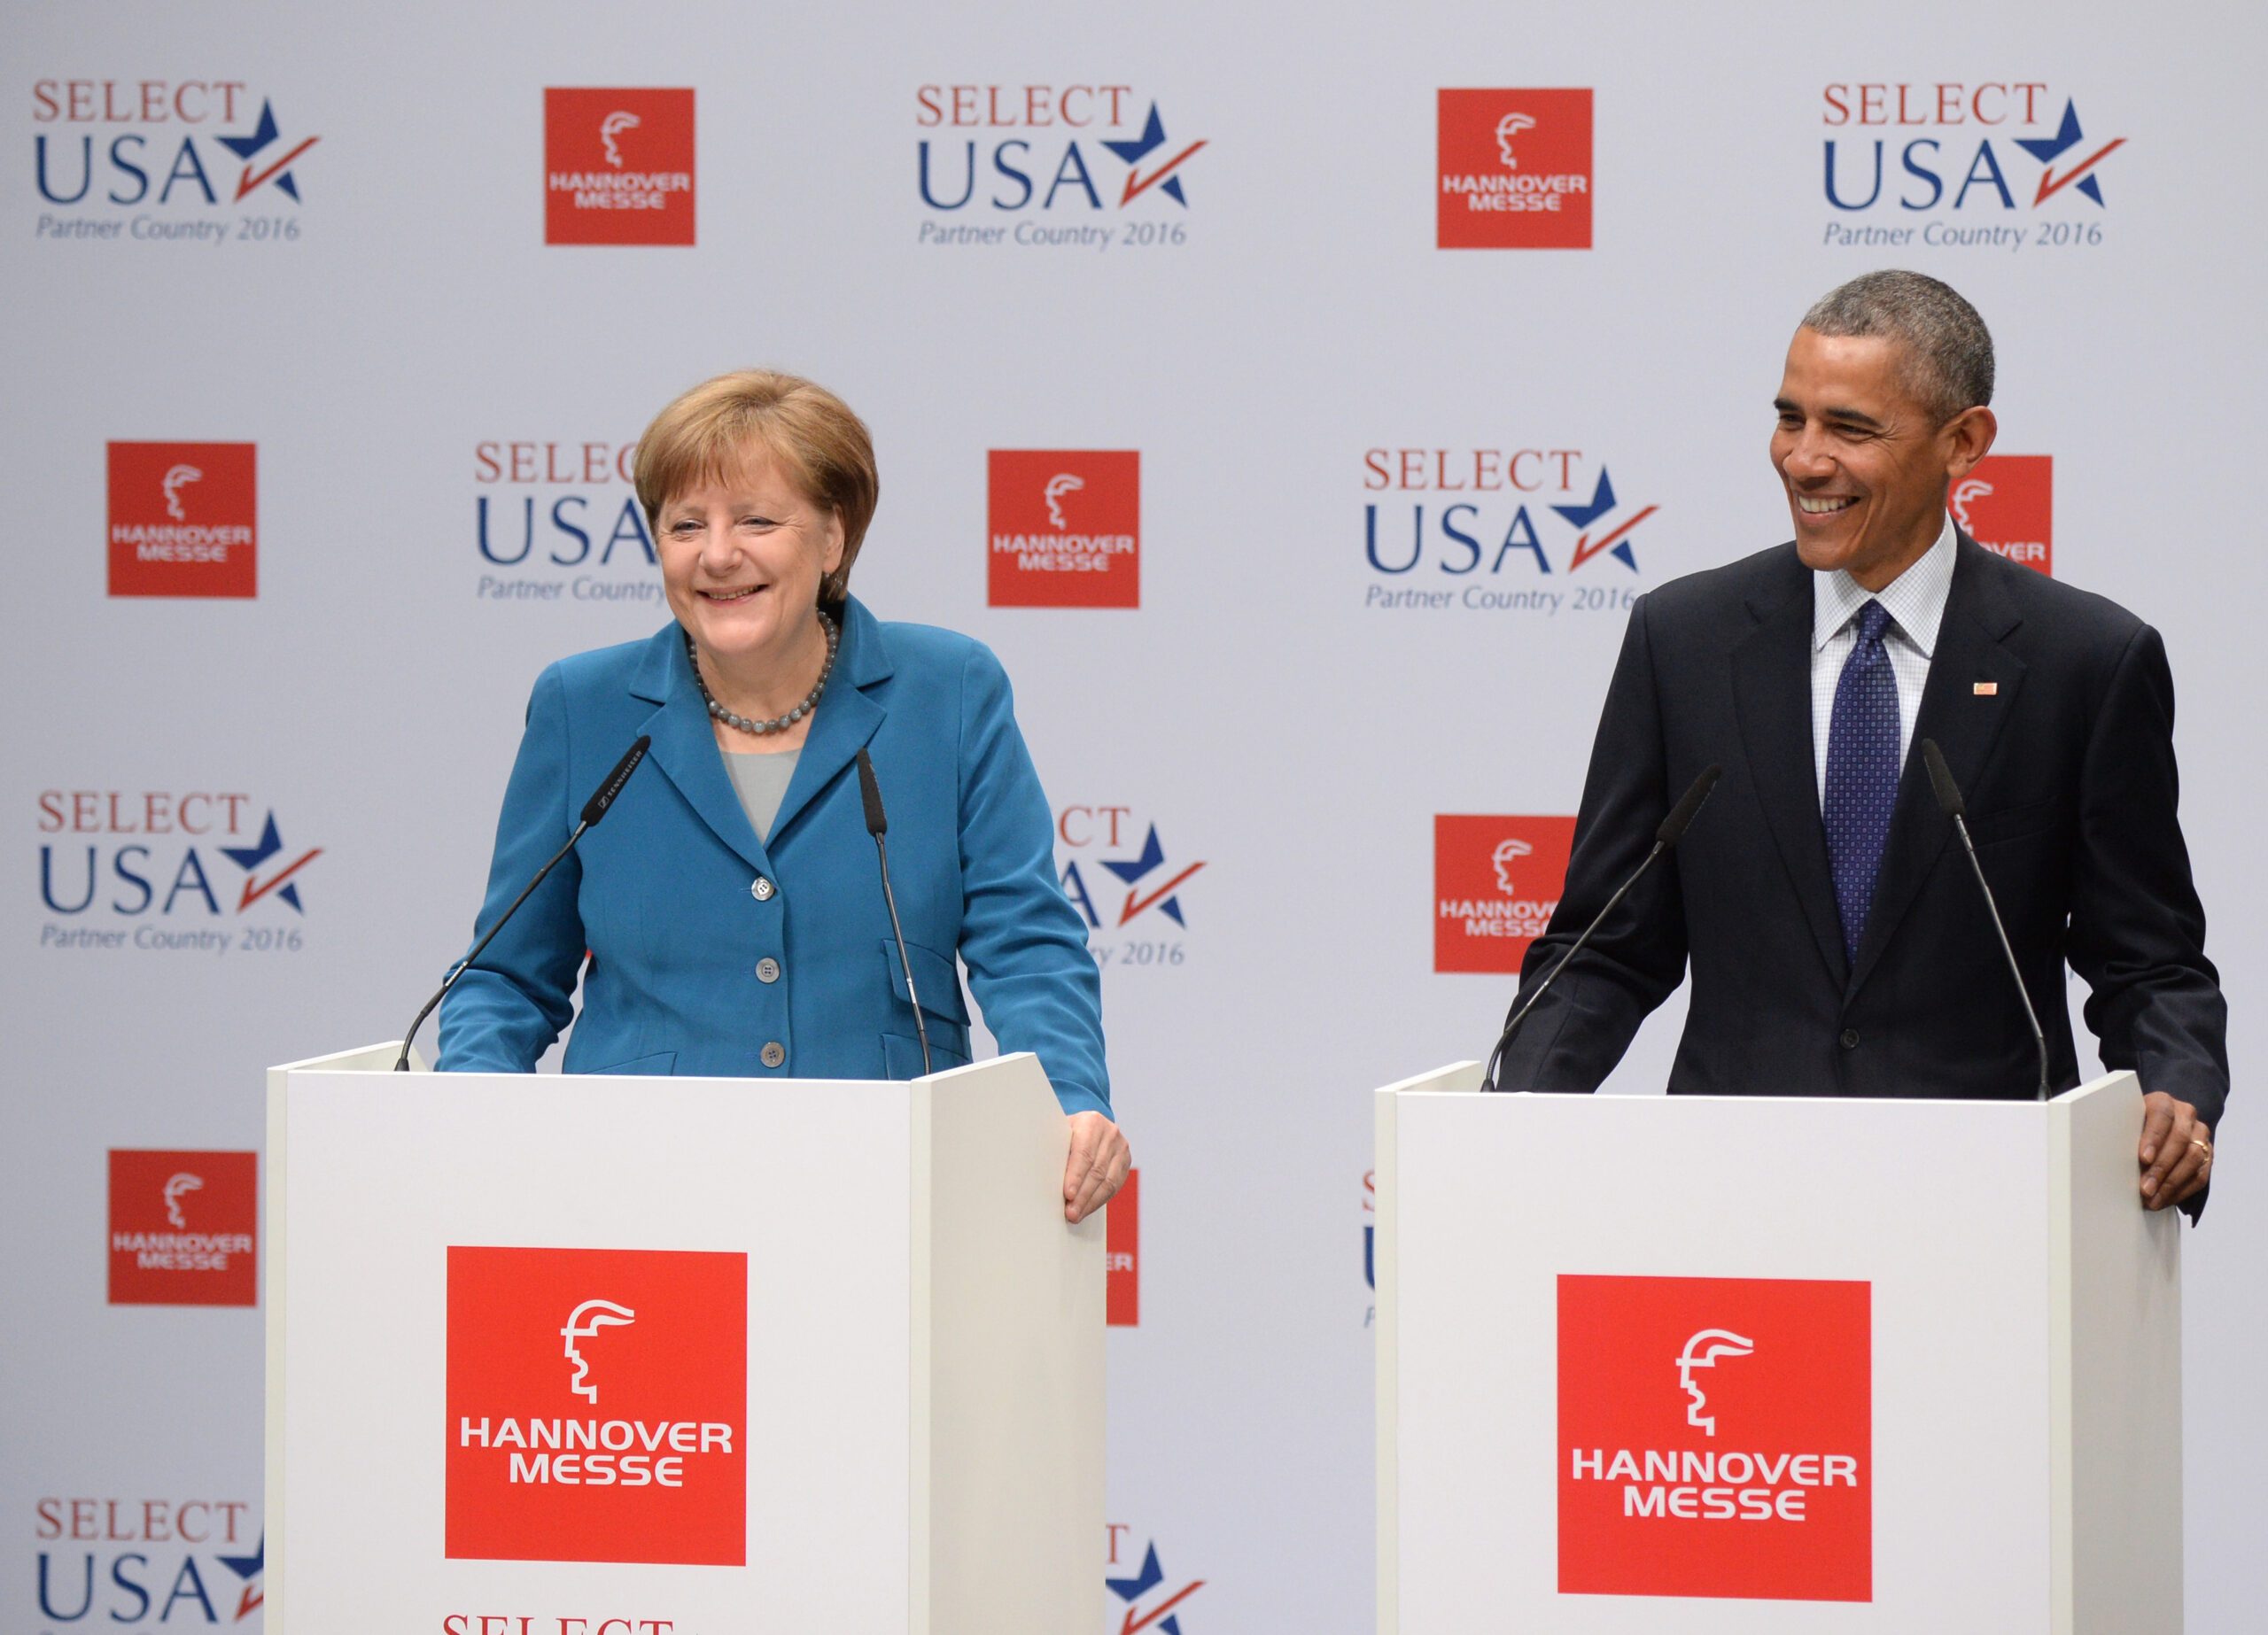 5 key facts on a planned US-EU trade pact